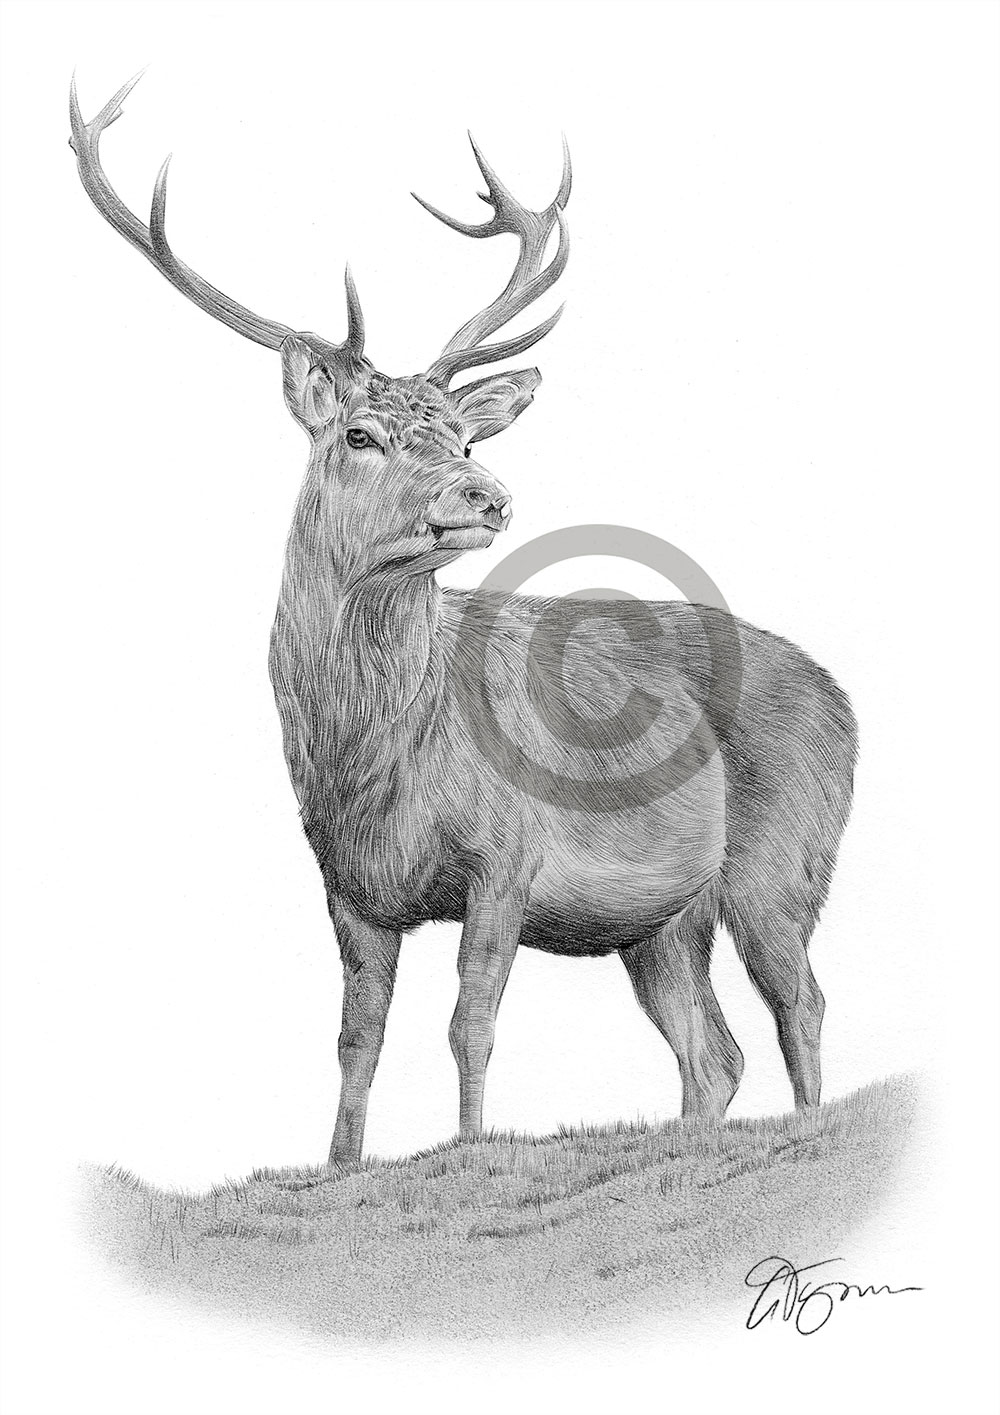 Pencil drawing of a red deer by artist Gary Tymon